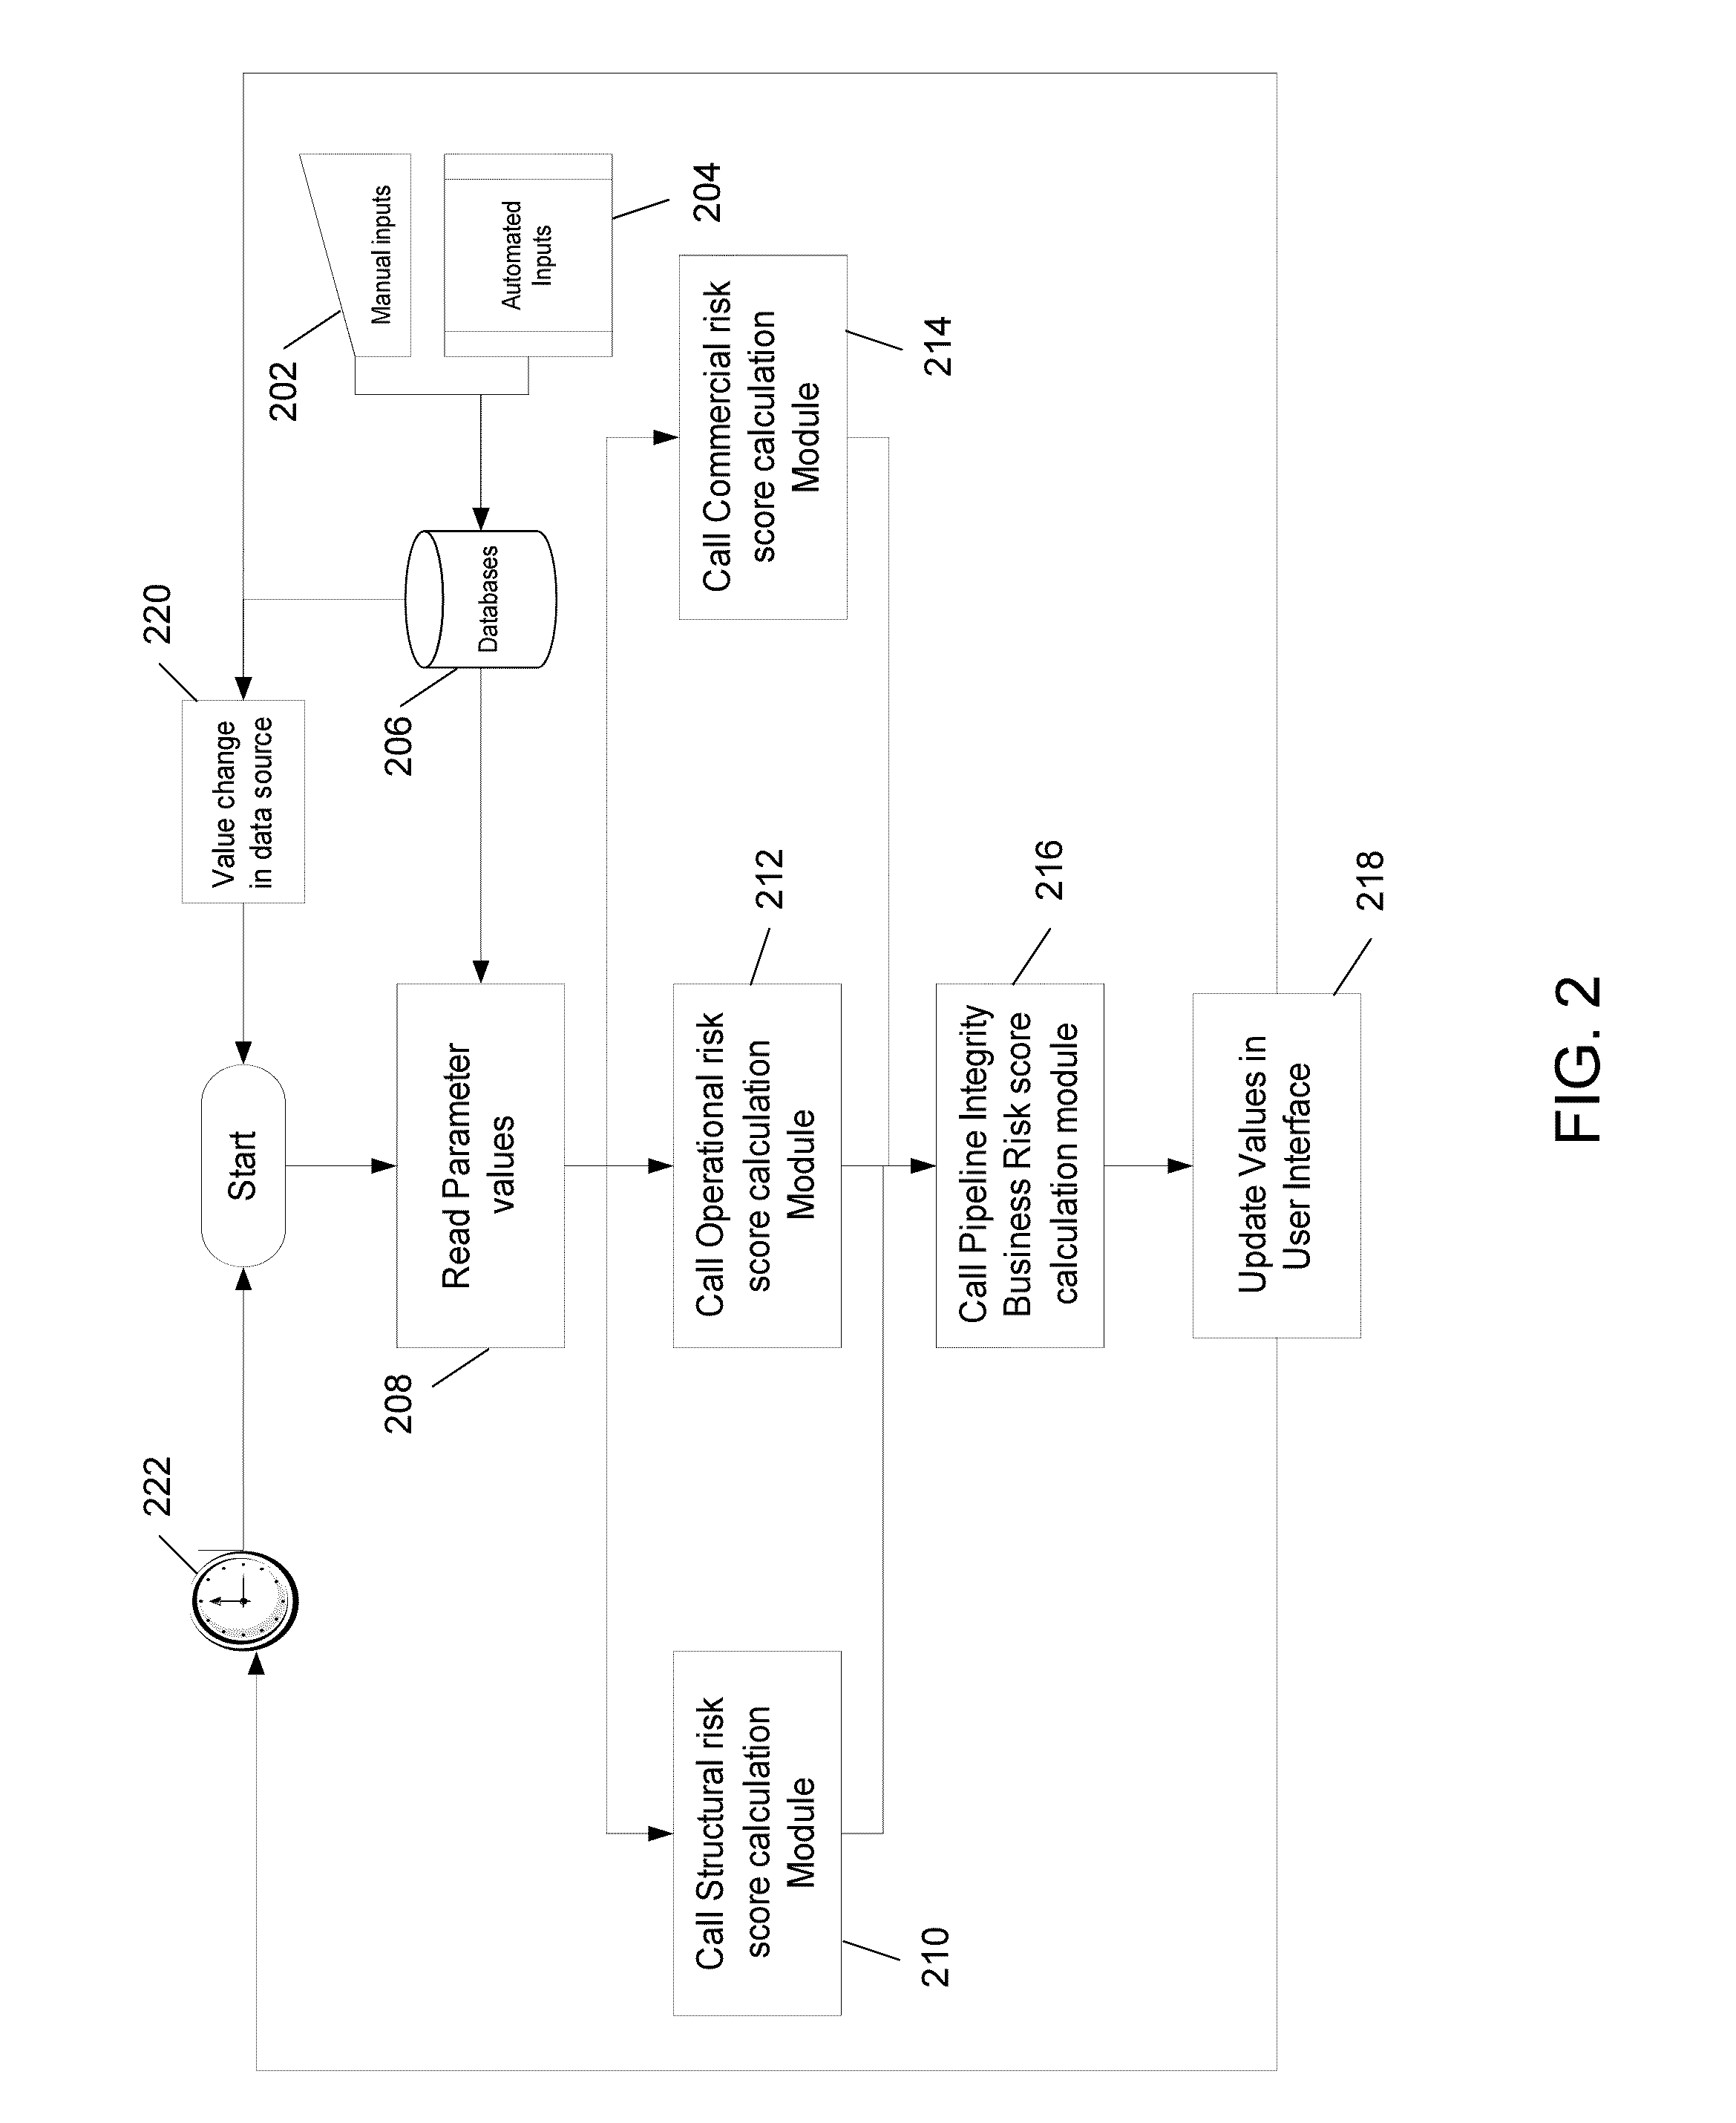 System and method for calculating a comprehensive pipeline integrity business risk score